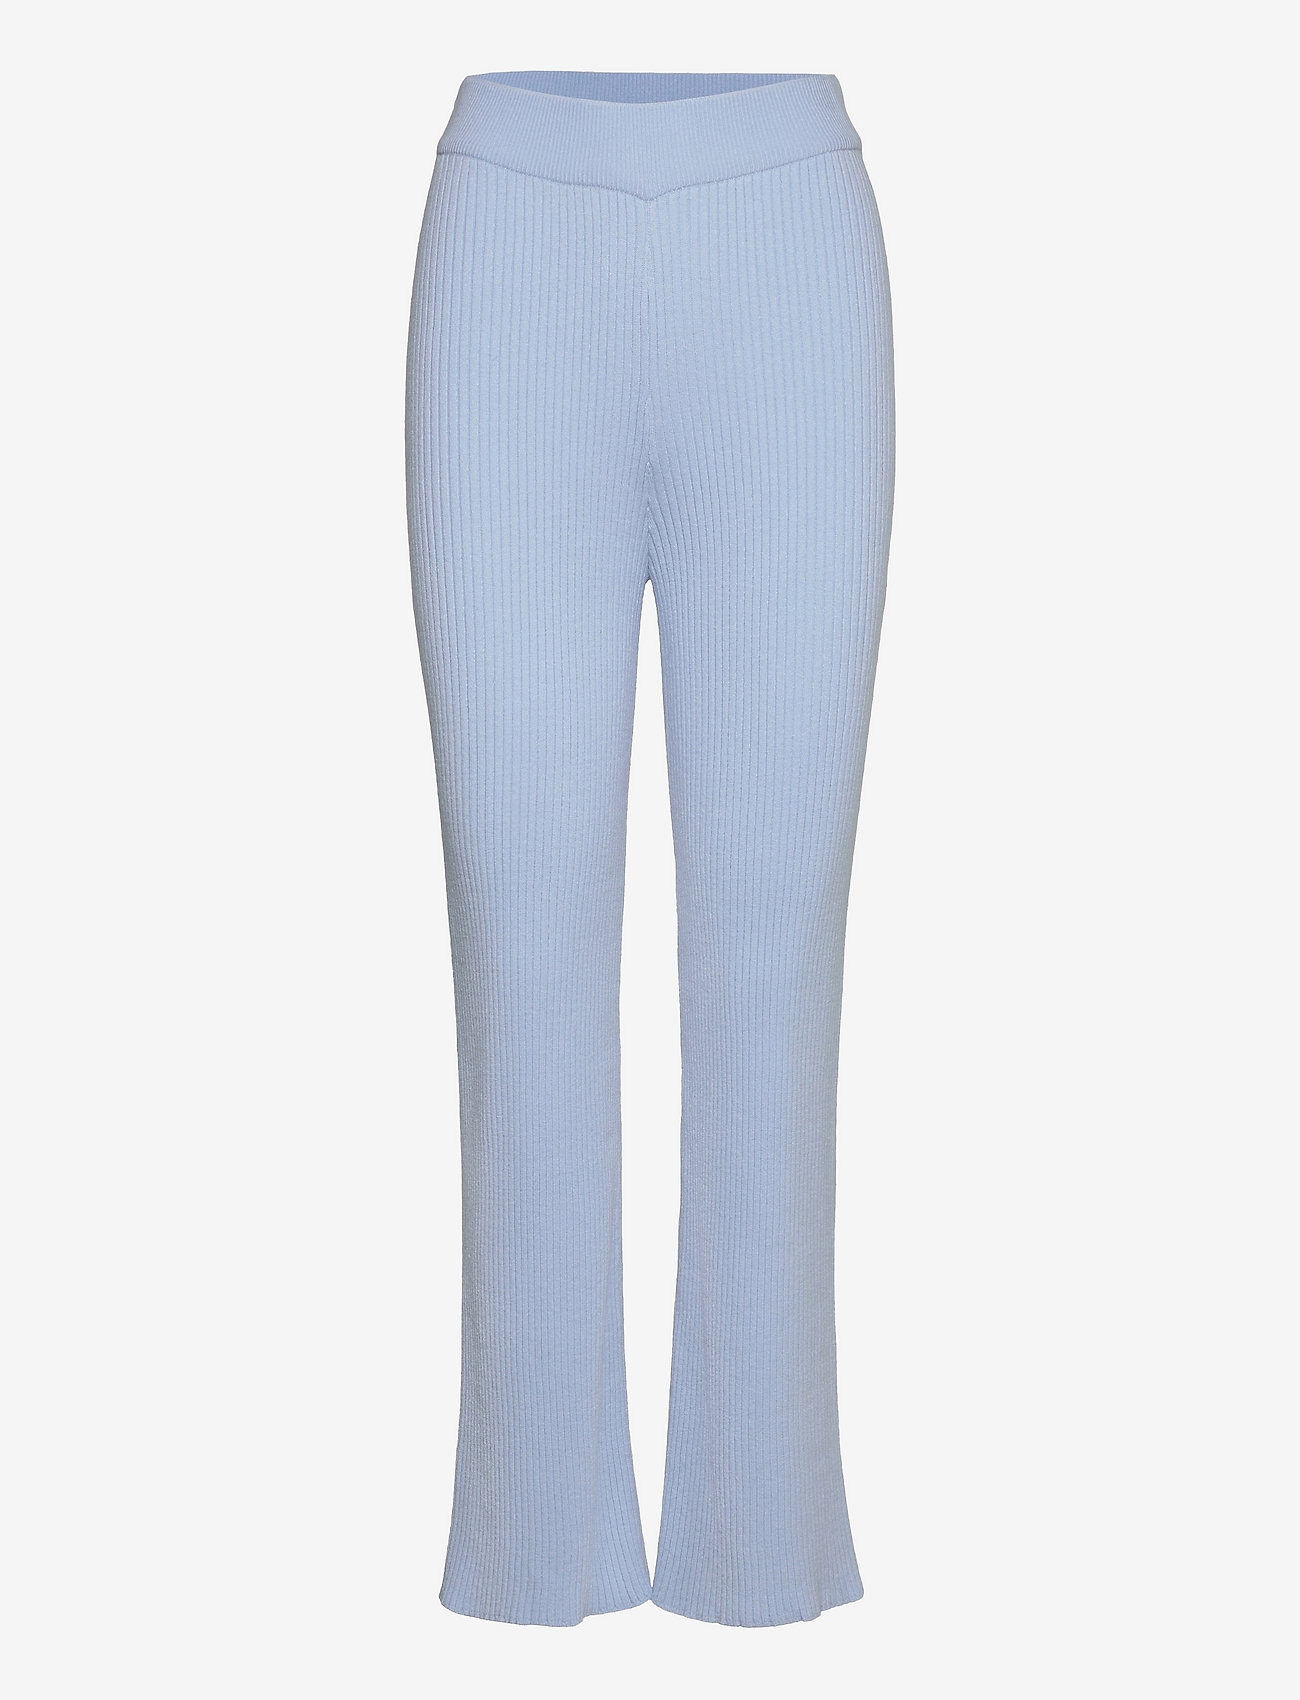 OW Collection - AVERY Pants - damen - 026 - blue - 0